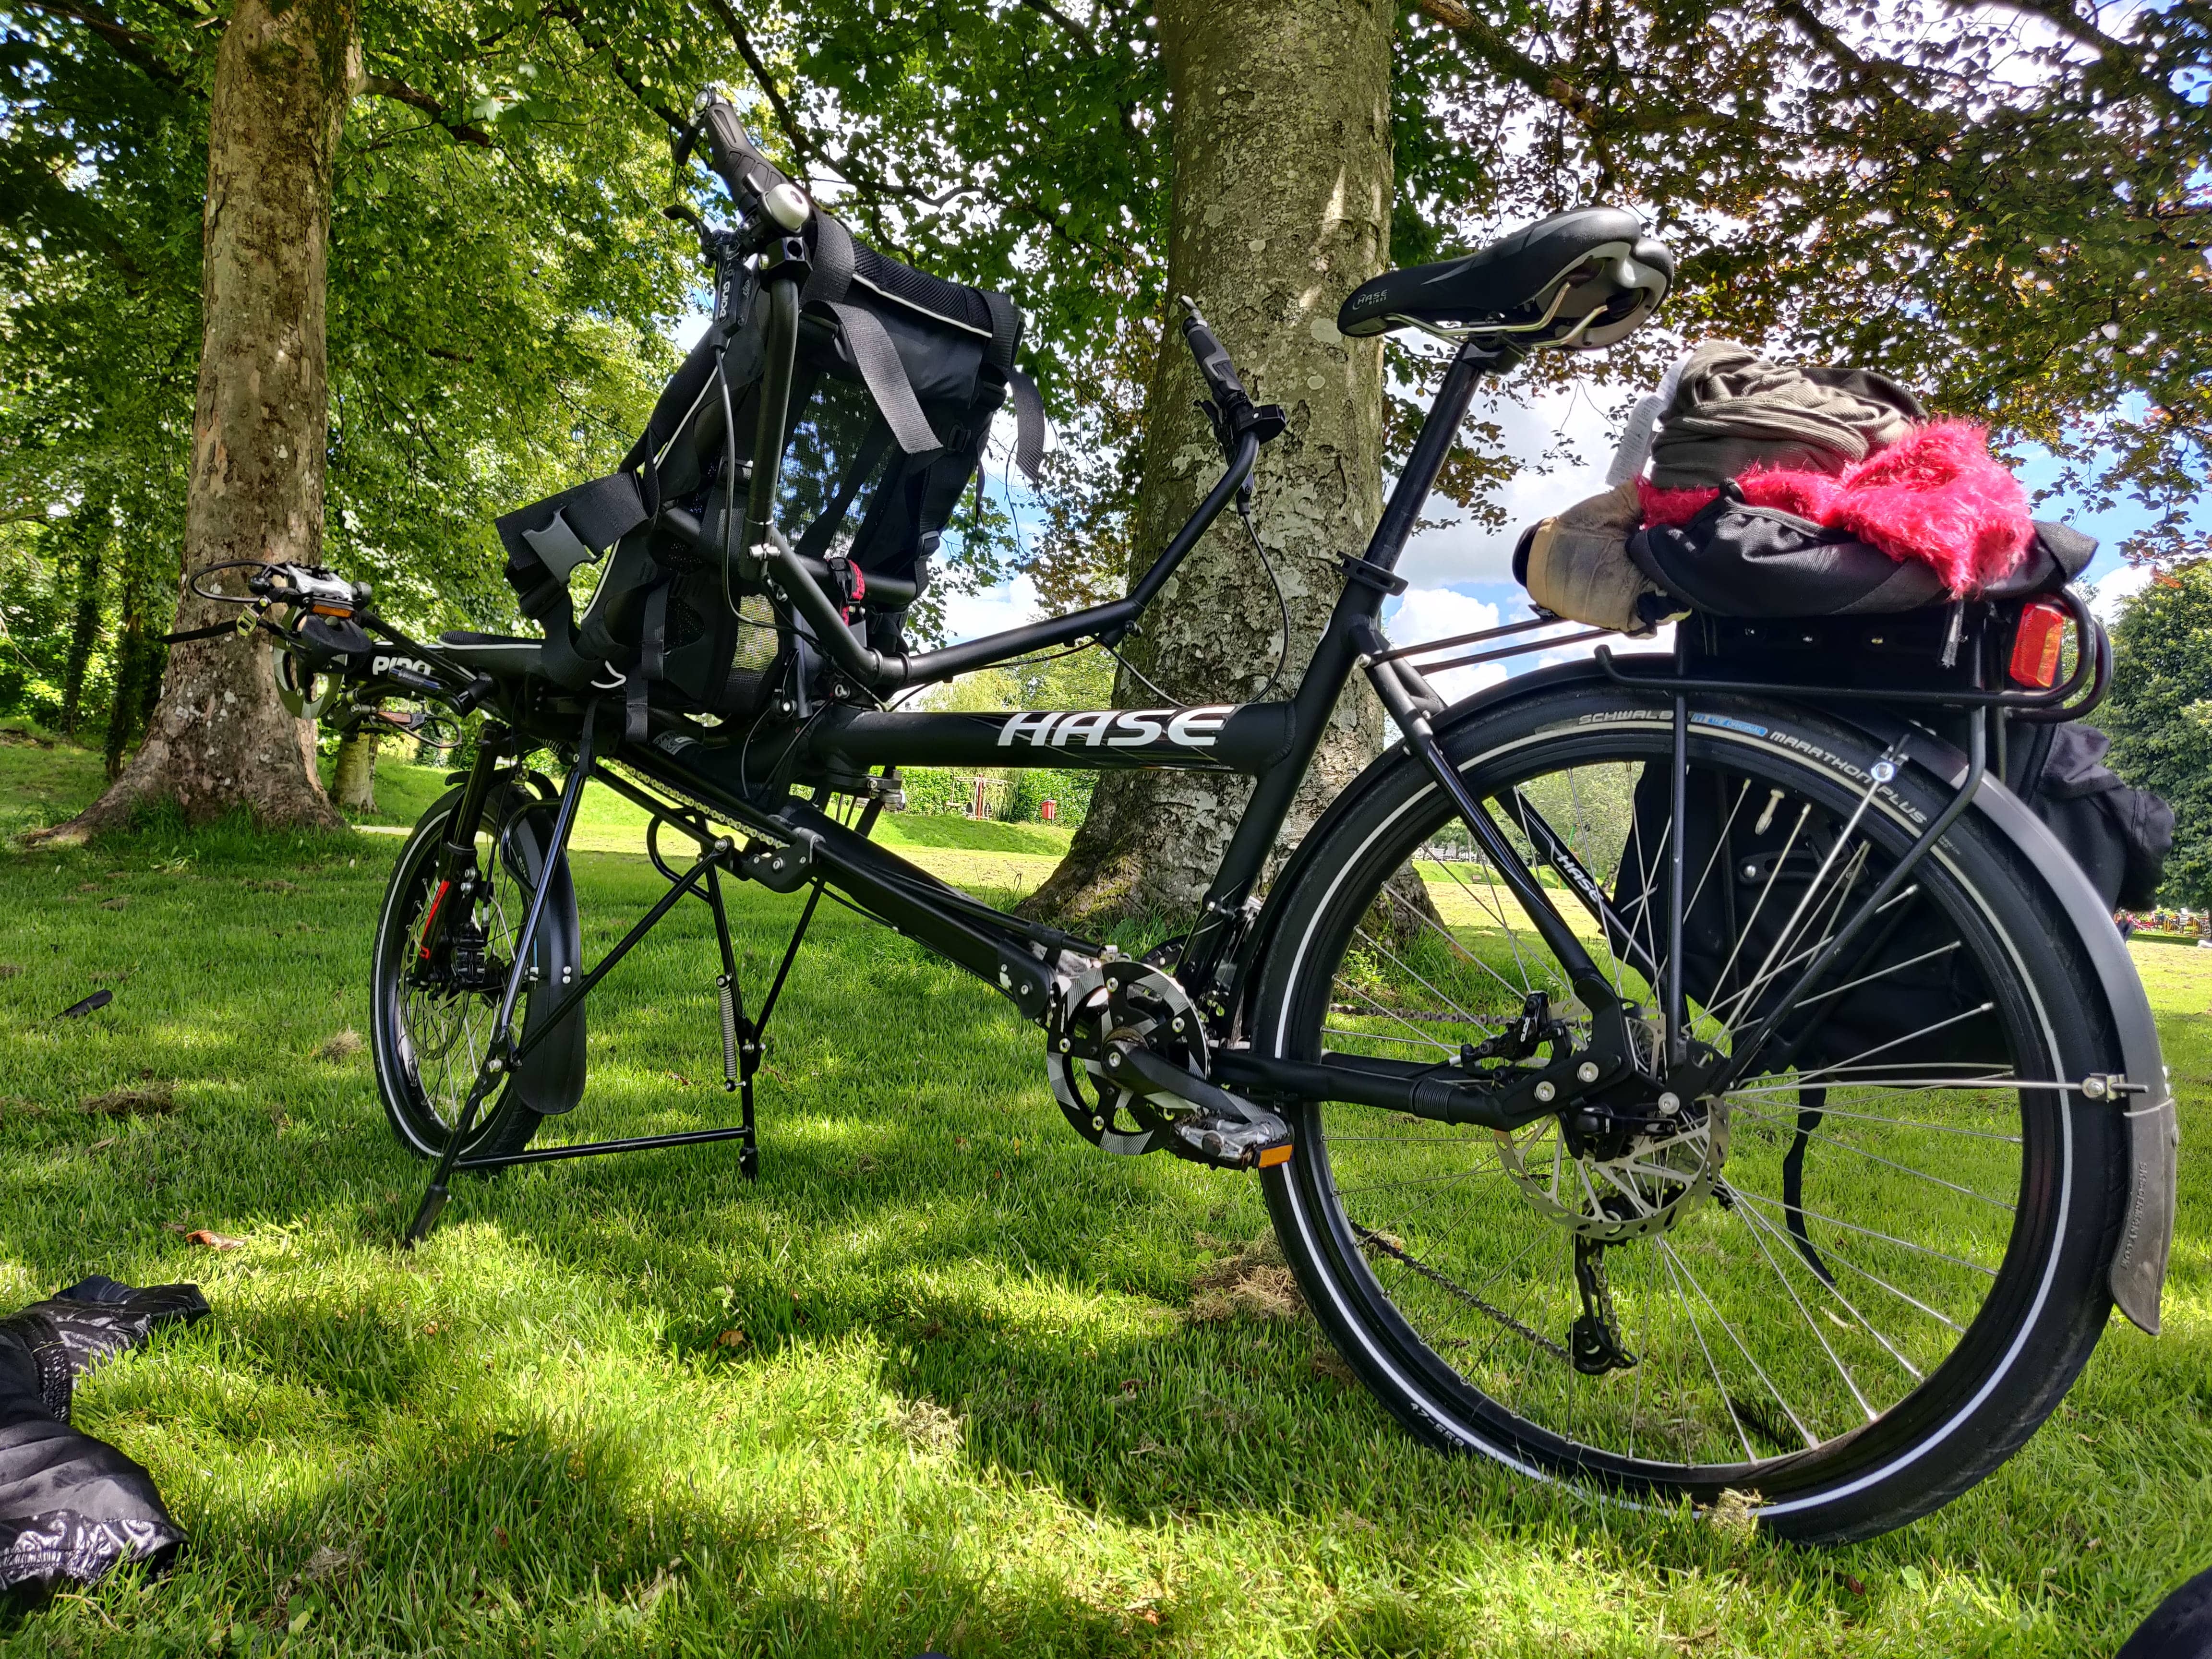 Tandem parked in a wooded field